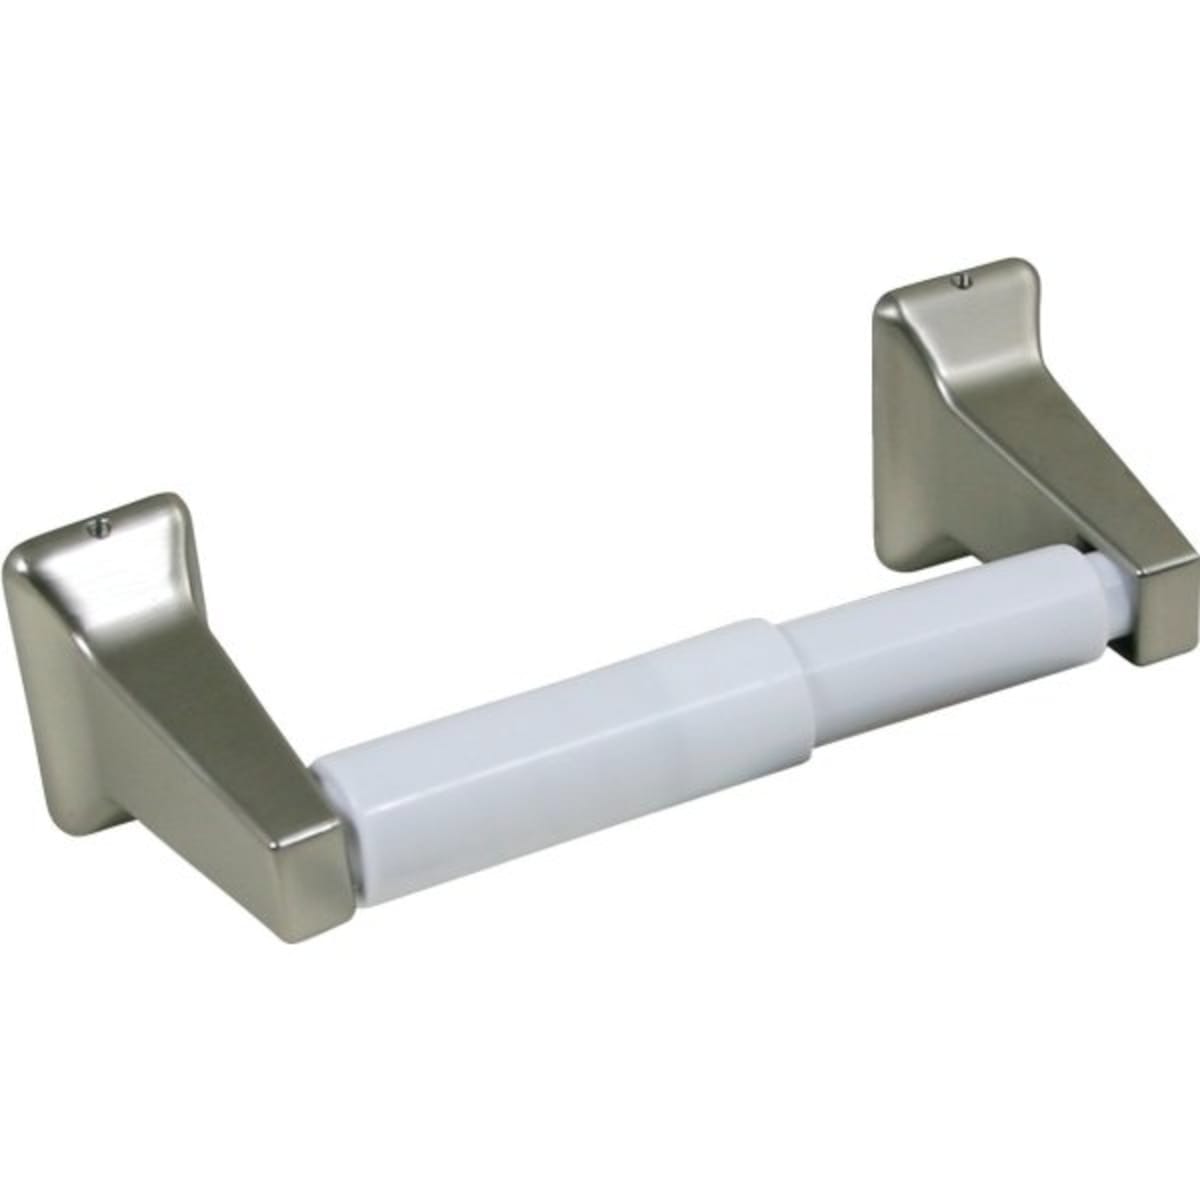 Proplus Part # 553114 - Proplus Toilet Paper Holder In Chrome - Toilet  Paper Holders & Rollers - Home Depot Pro